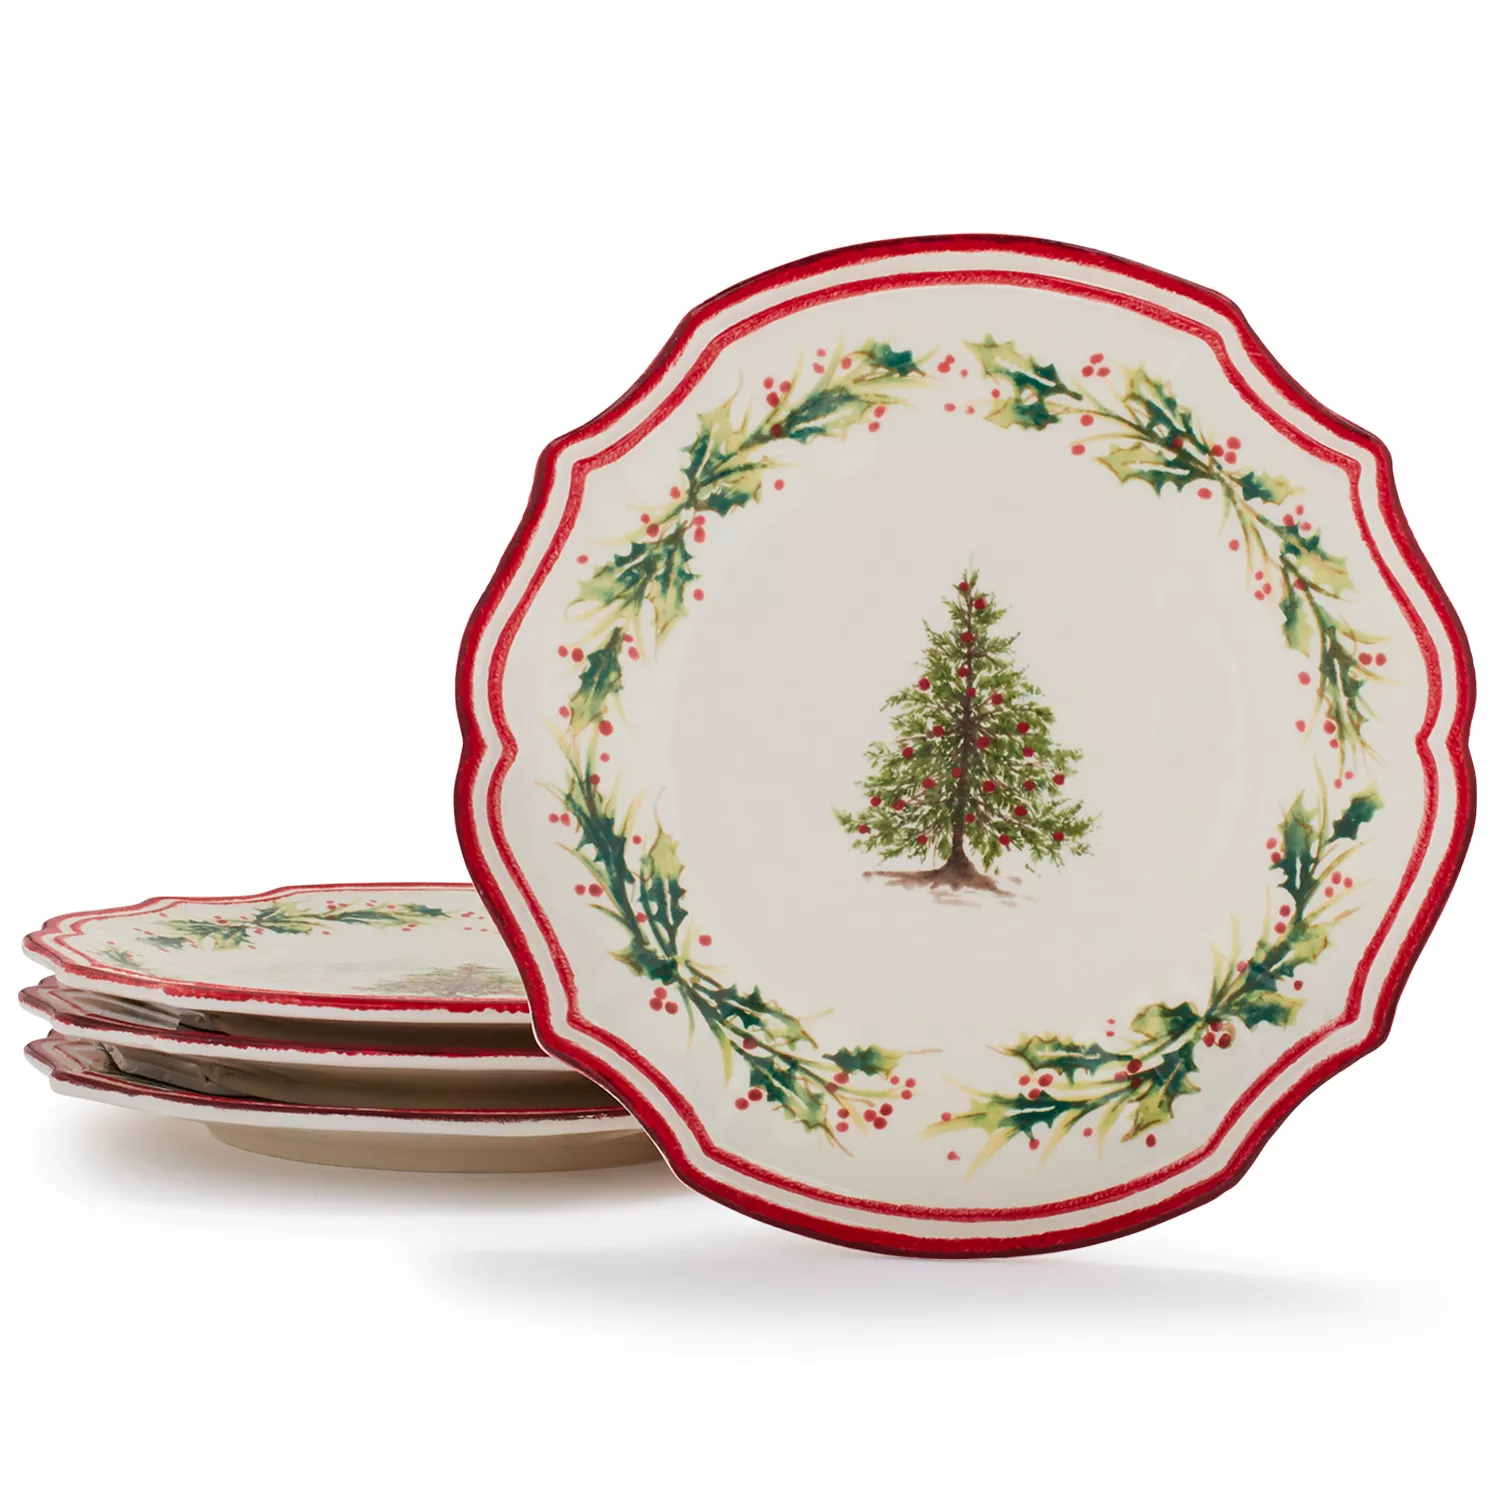 Sur La Table Holly and Pine Dinner Plates, Set of 4